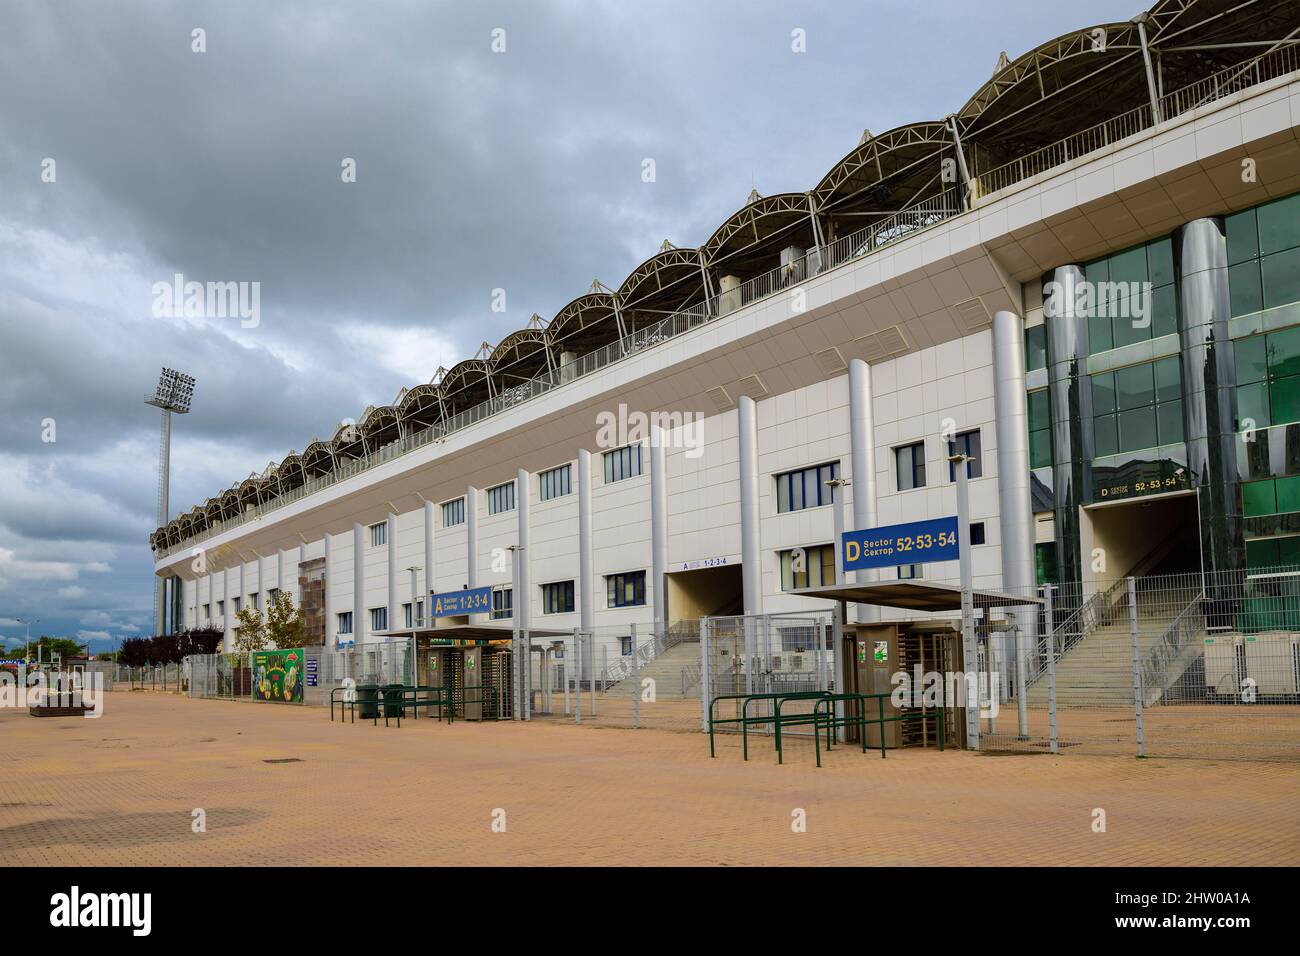 KASPIYSK, RUSSIA - SEPTEMBER 23, 2021: Cloudy September day at the Anji Arena sports complex Stock Photo